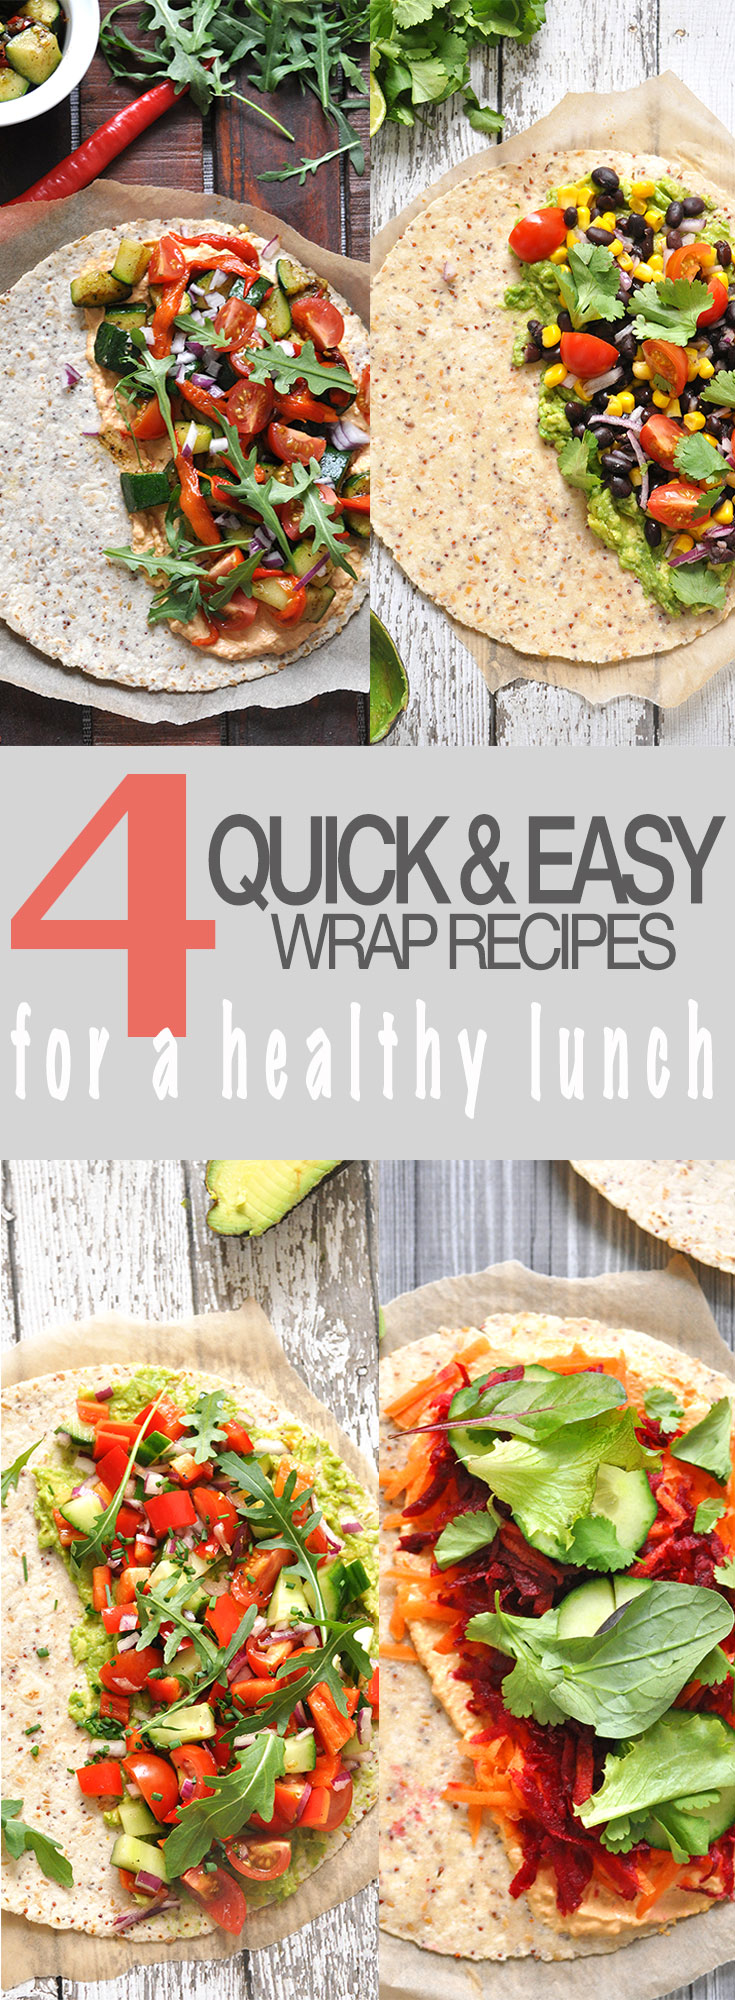 5-wrap-recipes-for-a-healthy-packed-lunch